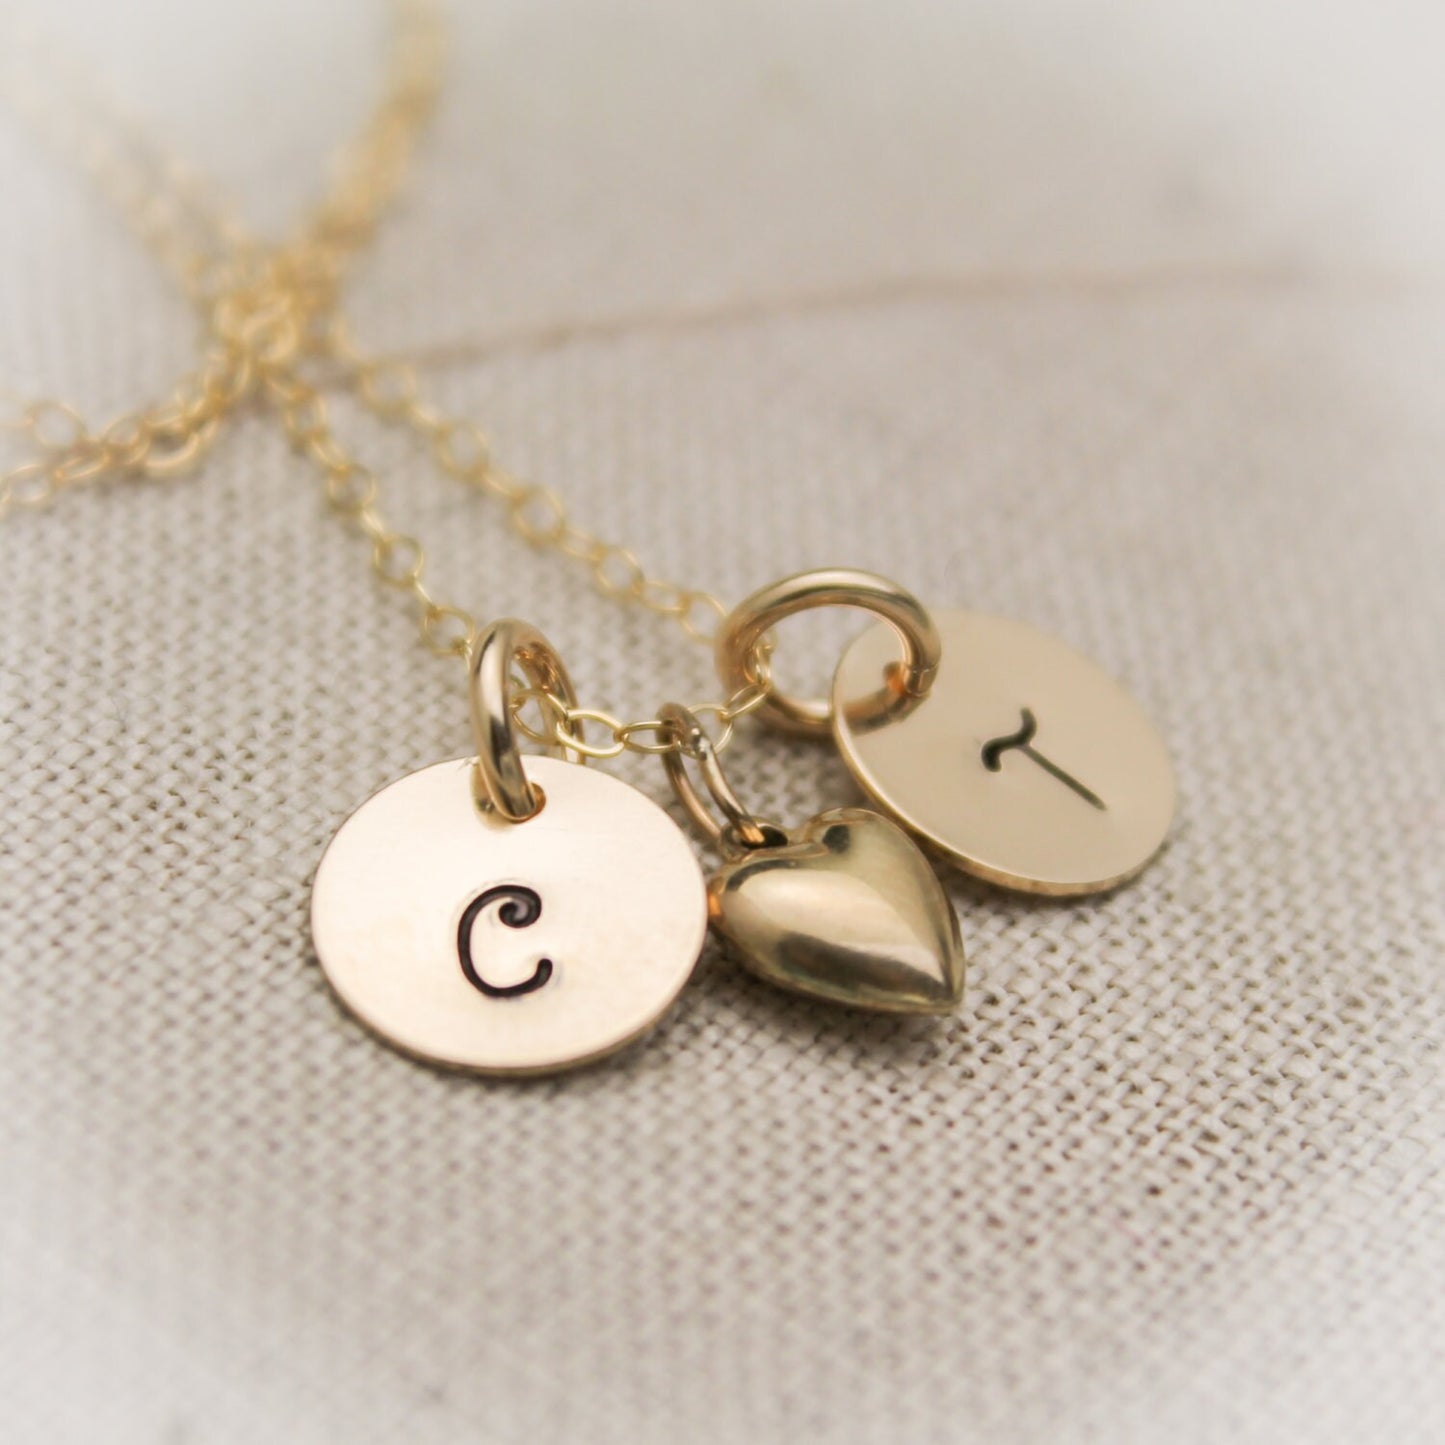 14K Gold Filled Couples Two Initial Monogram Necklace with Heart Charm  Personalized Hand Stamped Jewelry